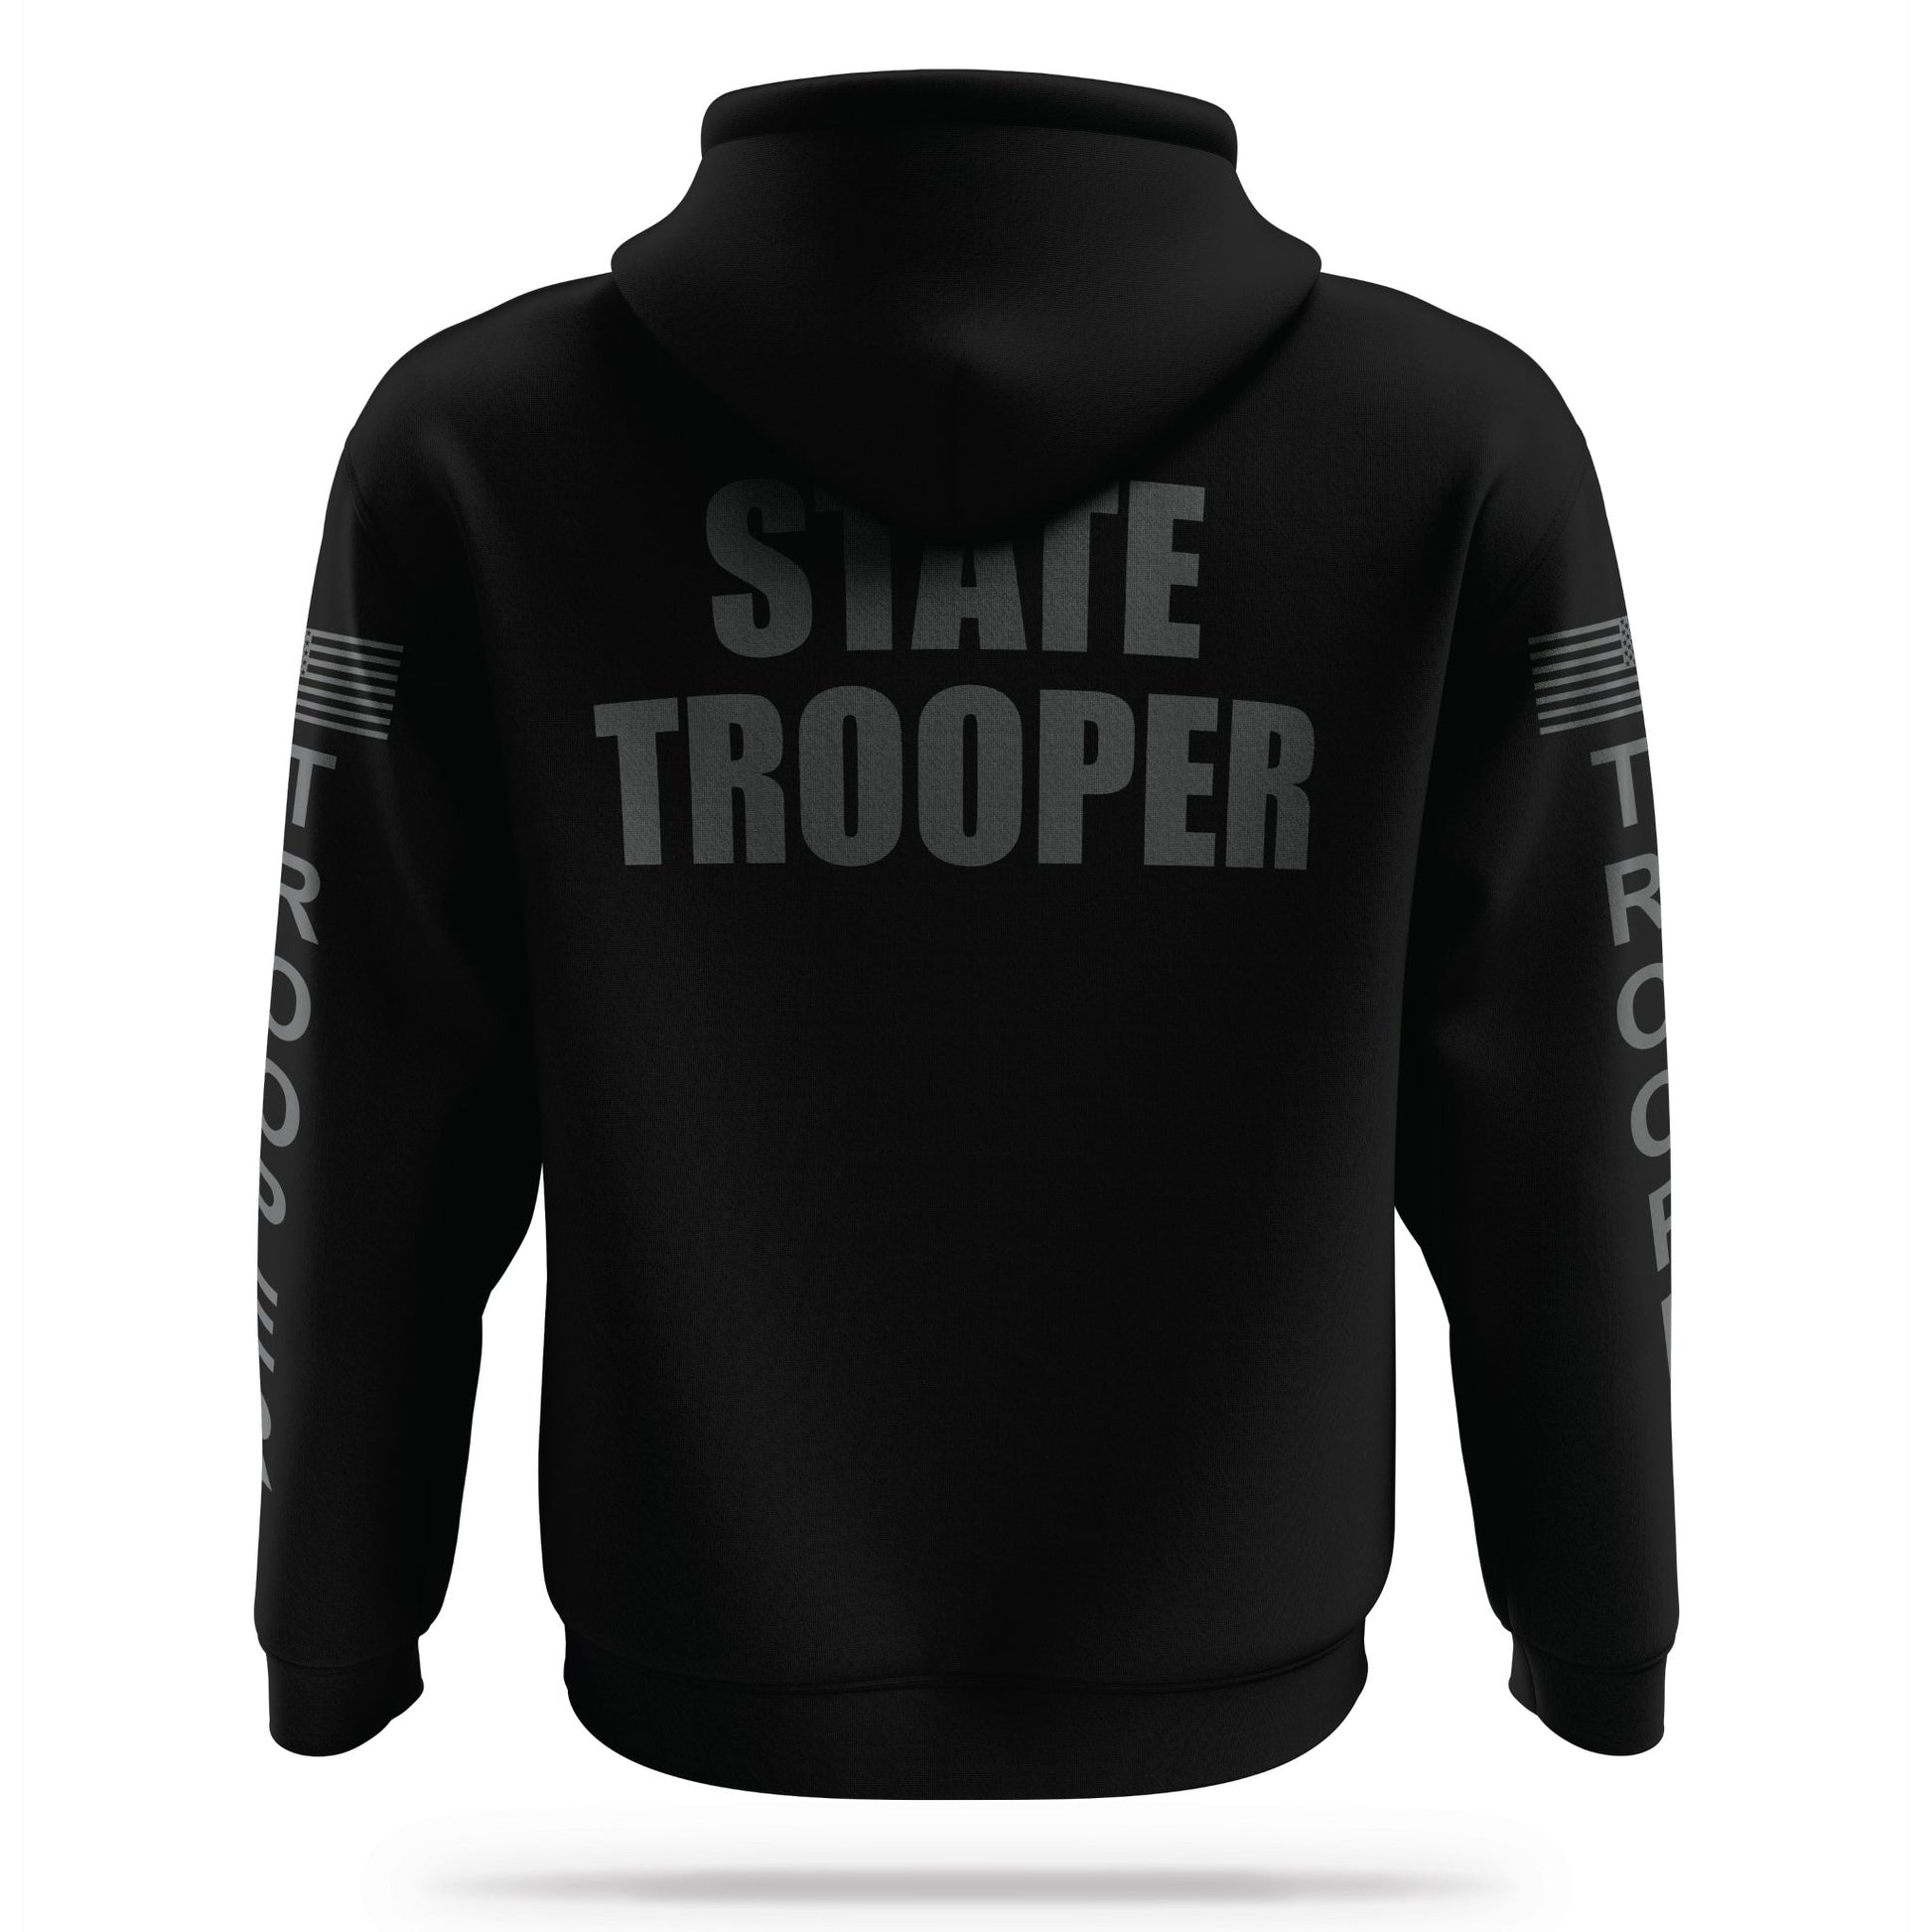 [STATE TROOPER] Performance Hoodie 2.0 [BLK/GRY]-13 Fifty Apparel